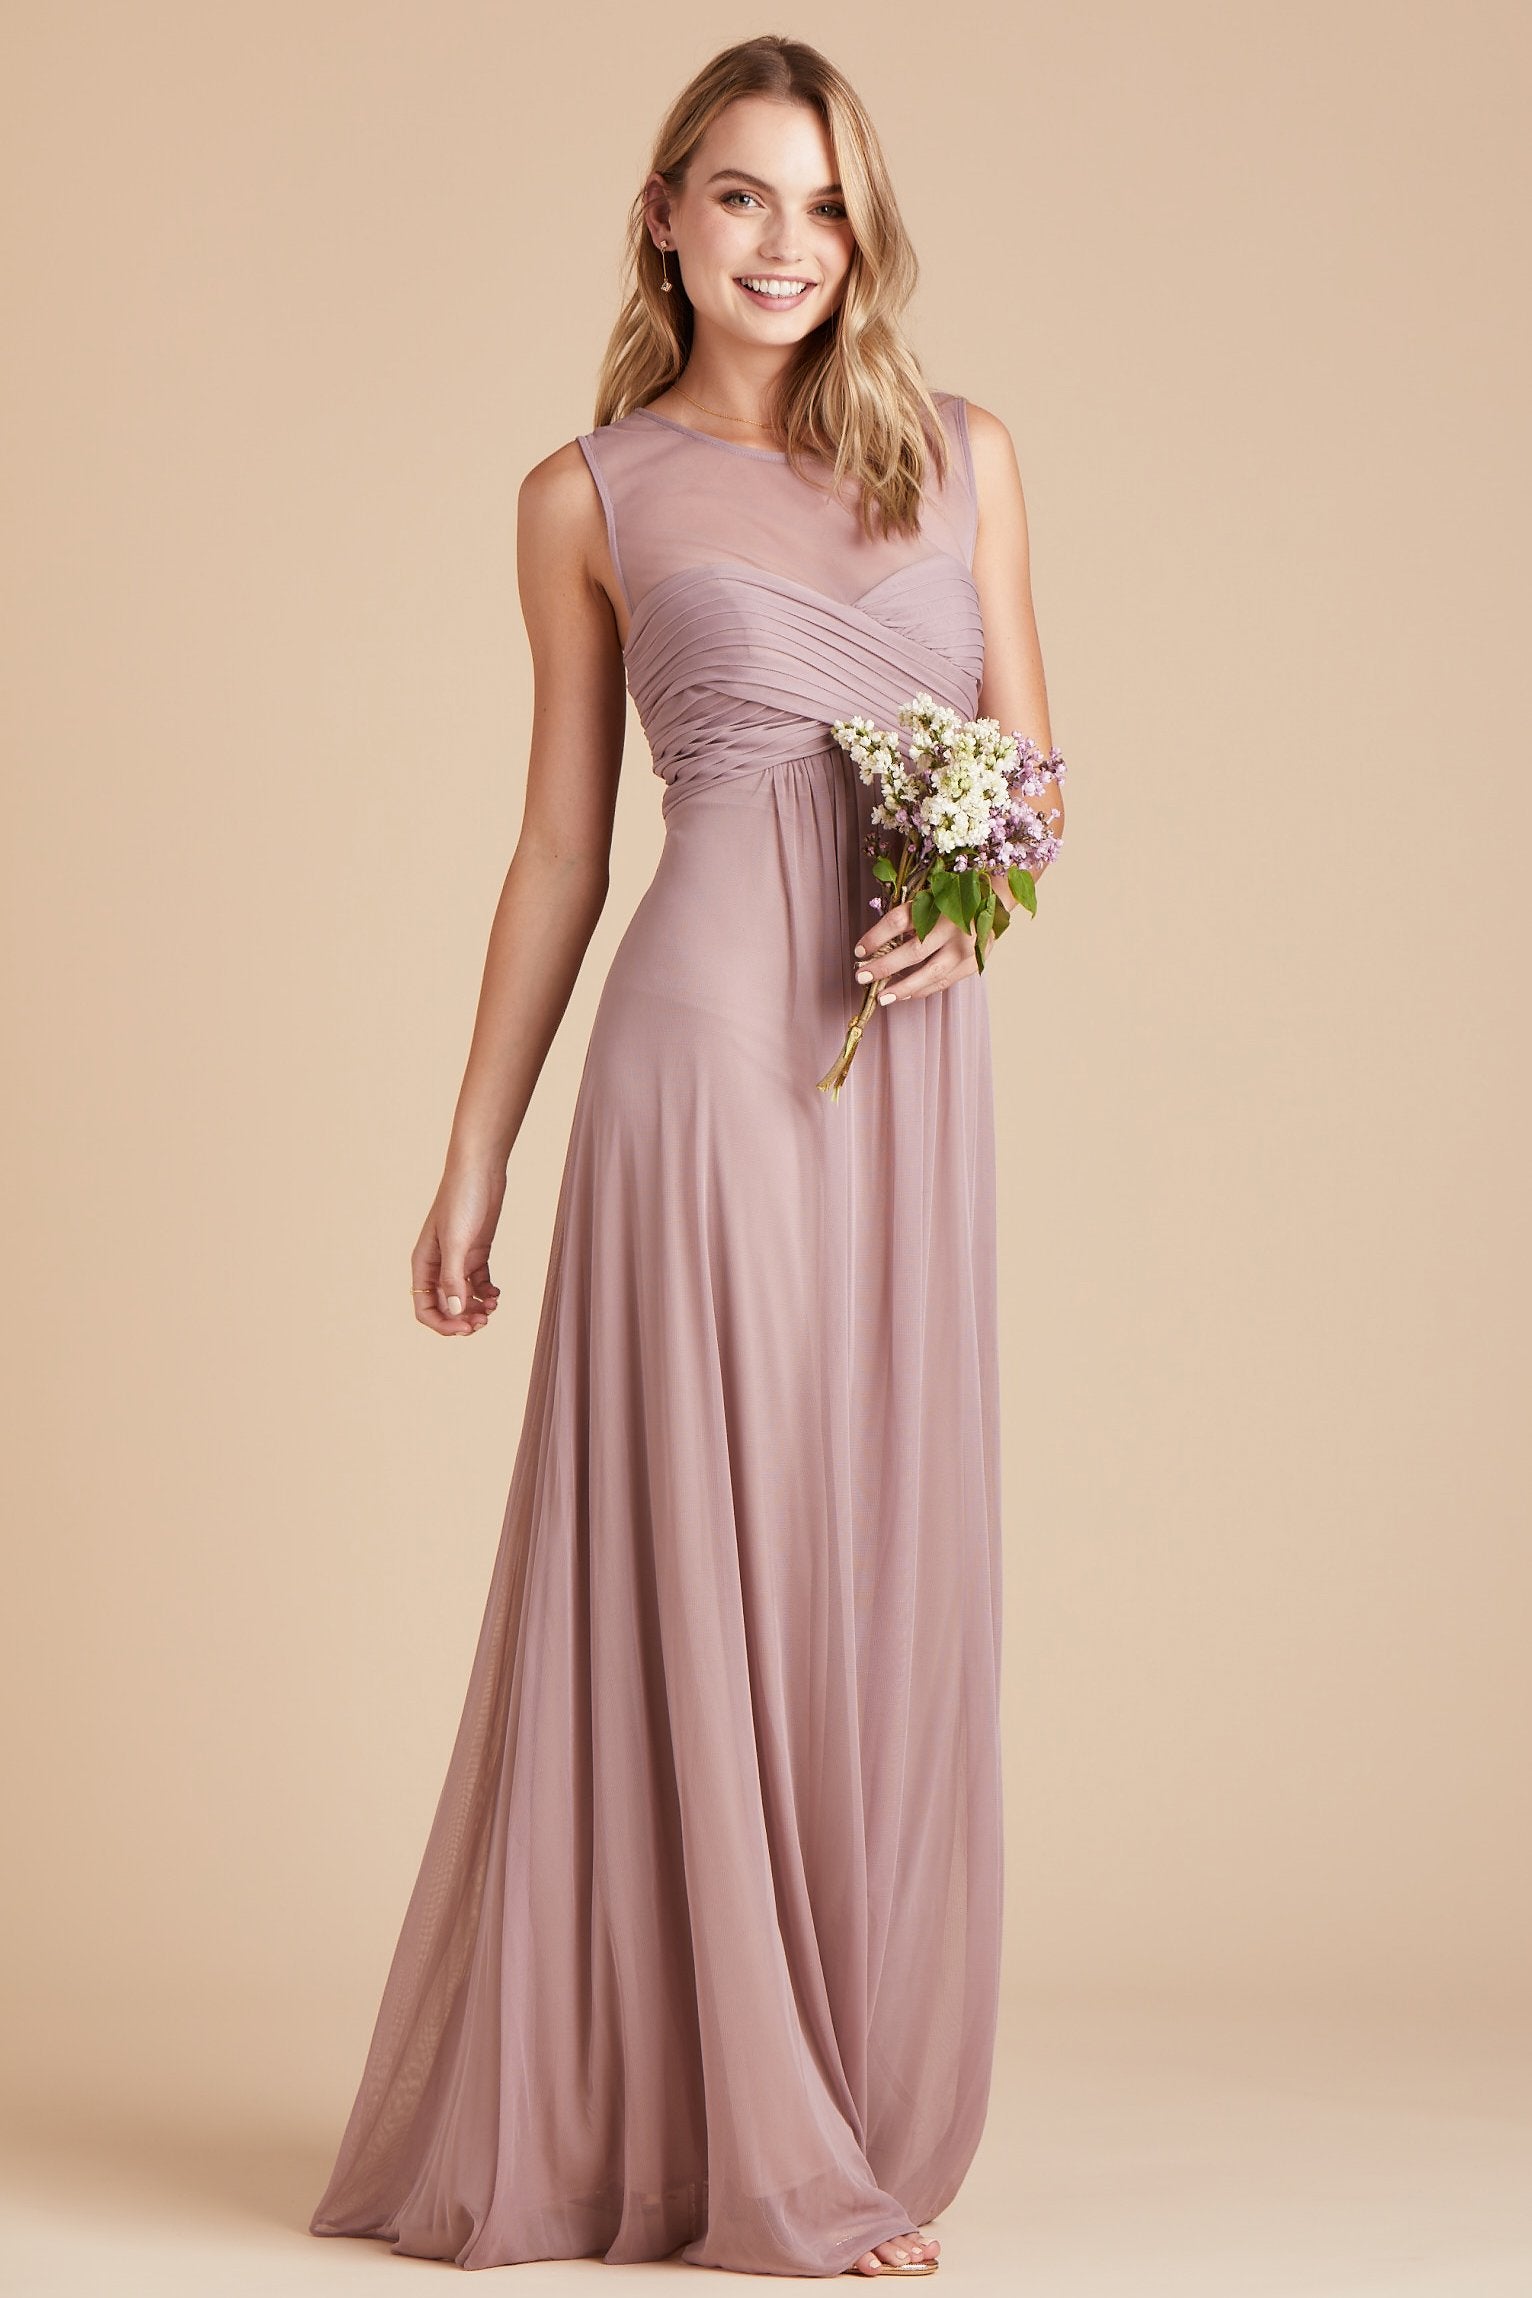 Ryan bridesmaid dress in mauve chiffon by Birdy Grey, front view